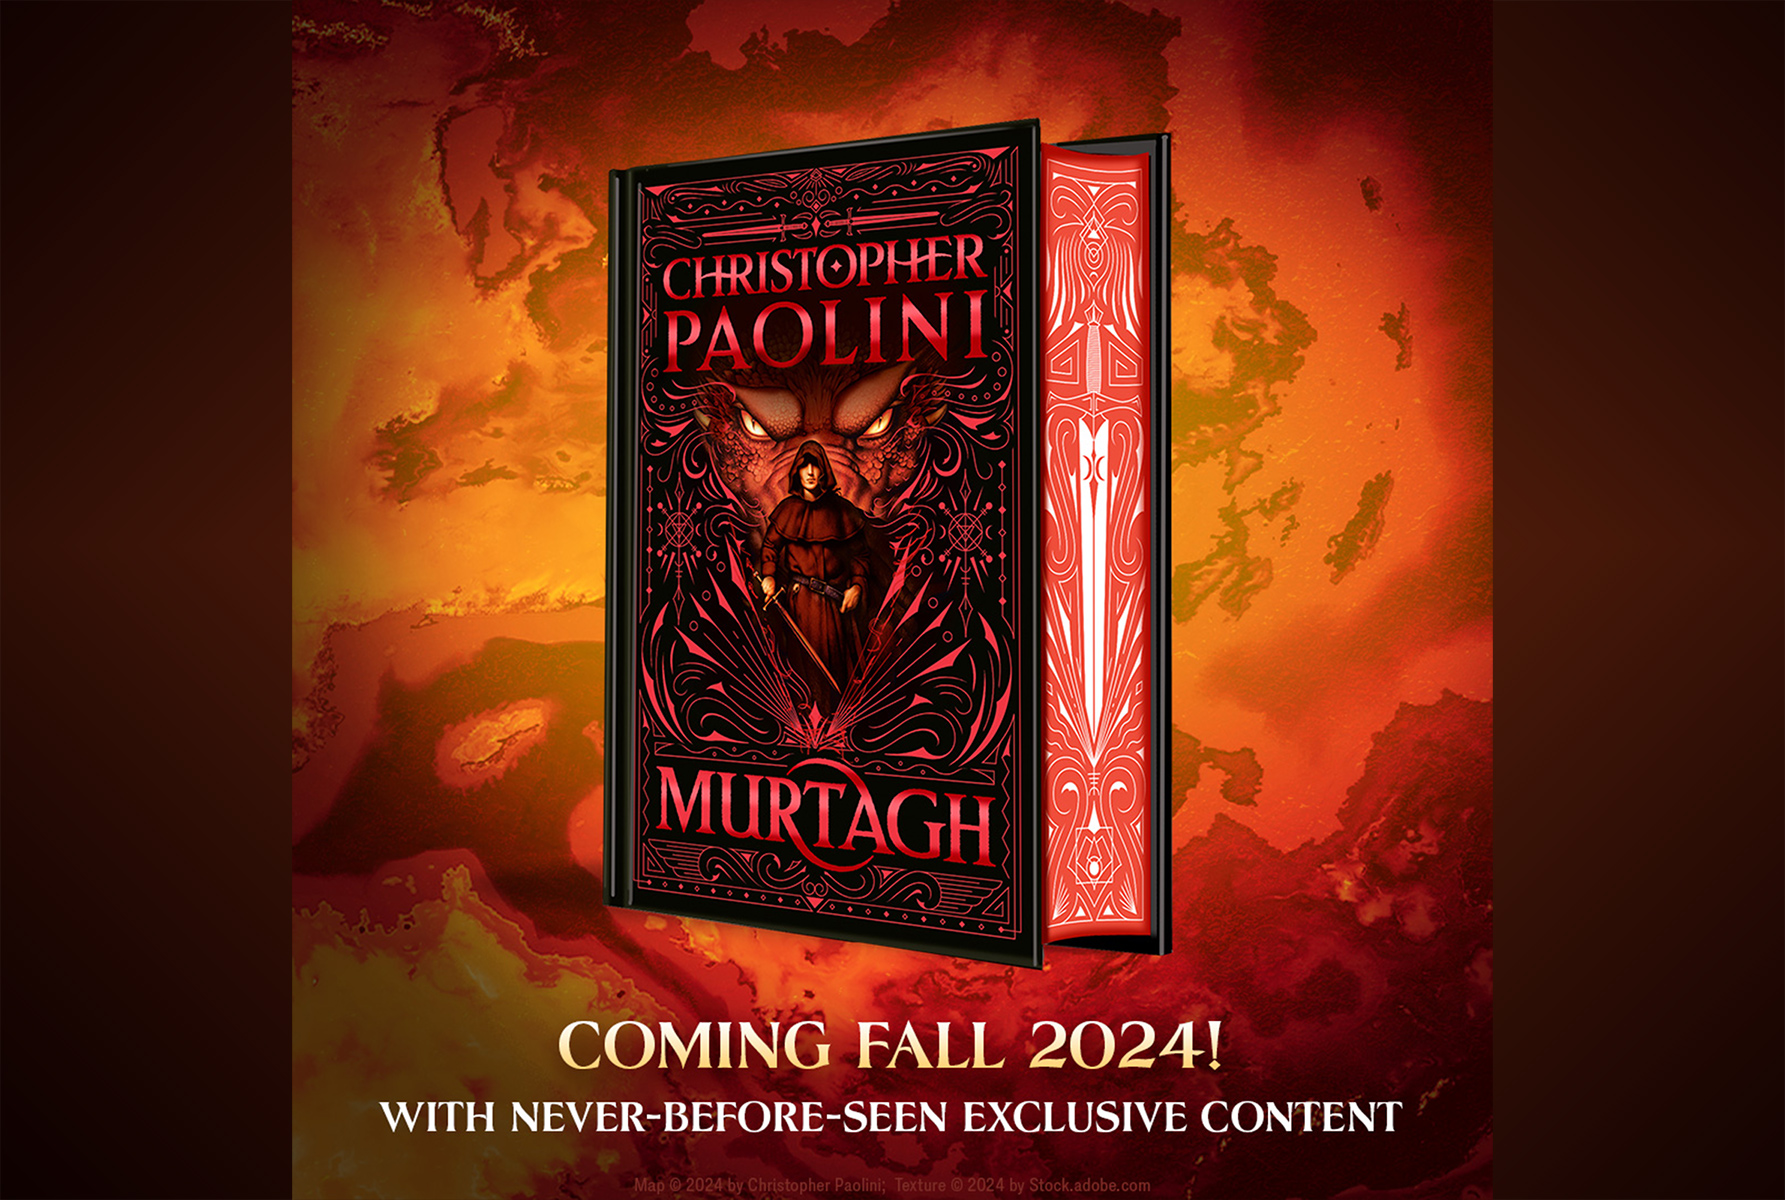 Announcing Murtagh Deluxe Edition!